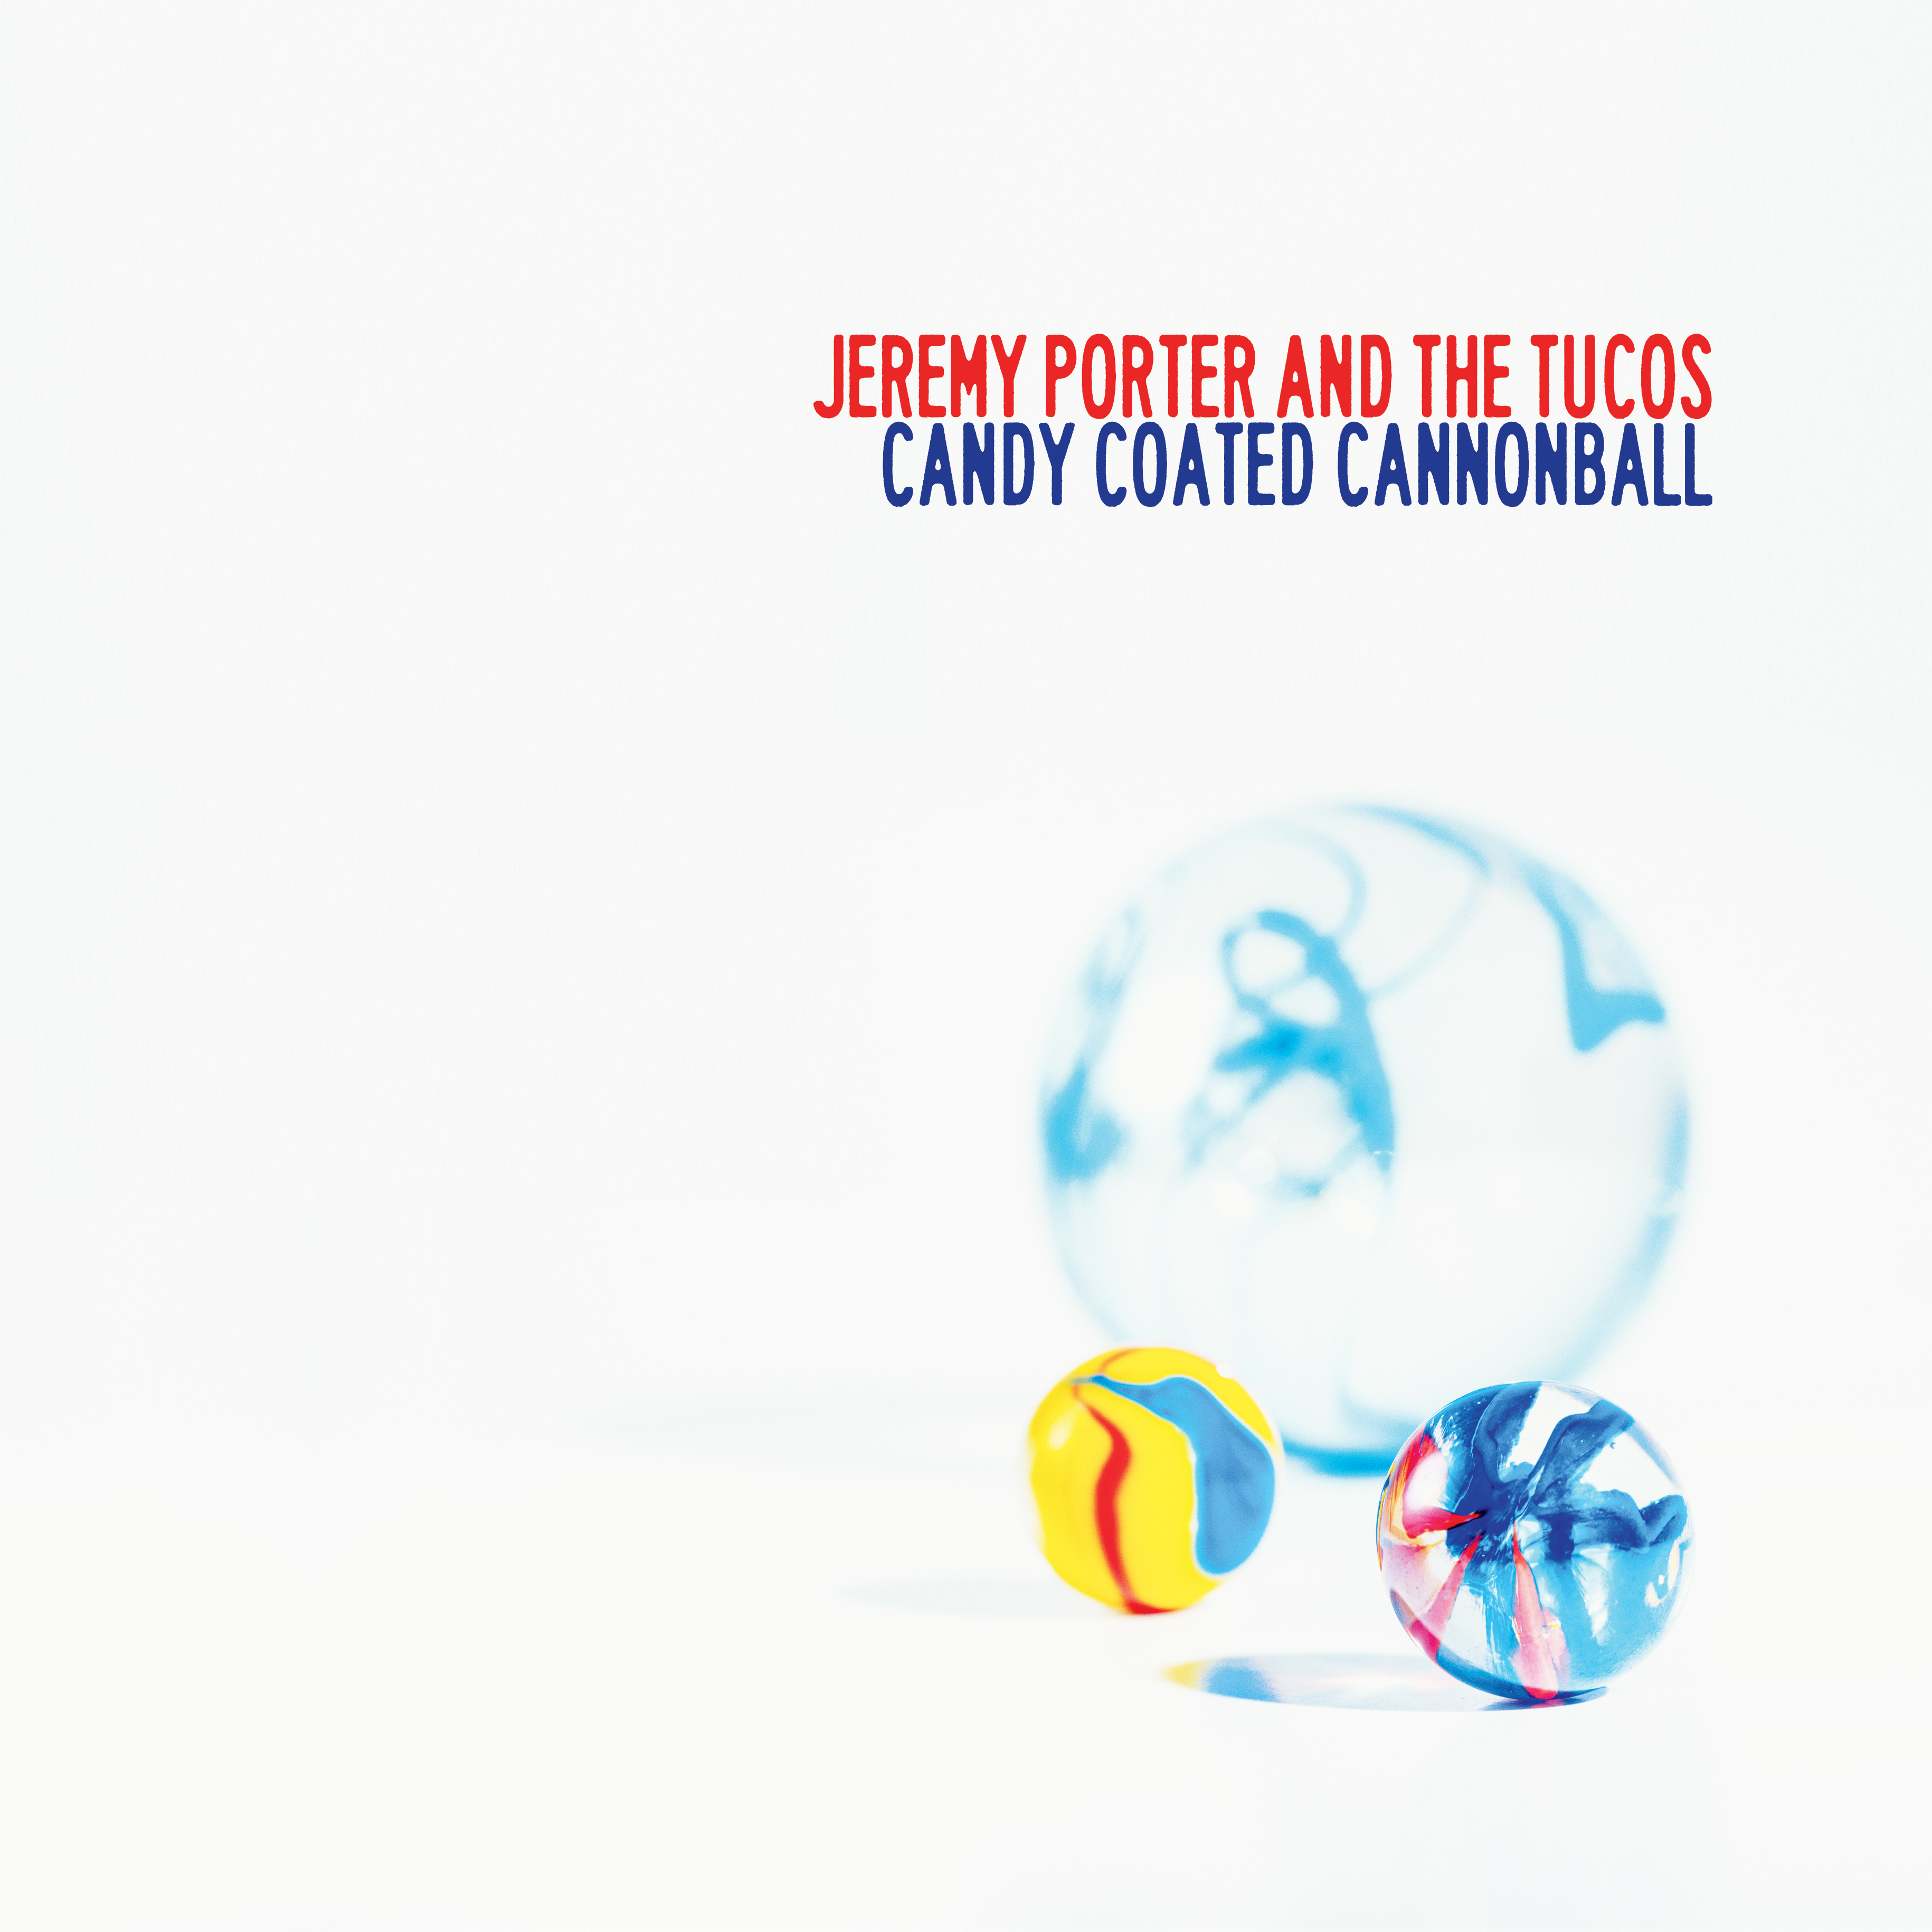 Jeremy Porter and The Tucos - Candy Coated Cannonball